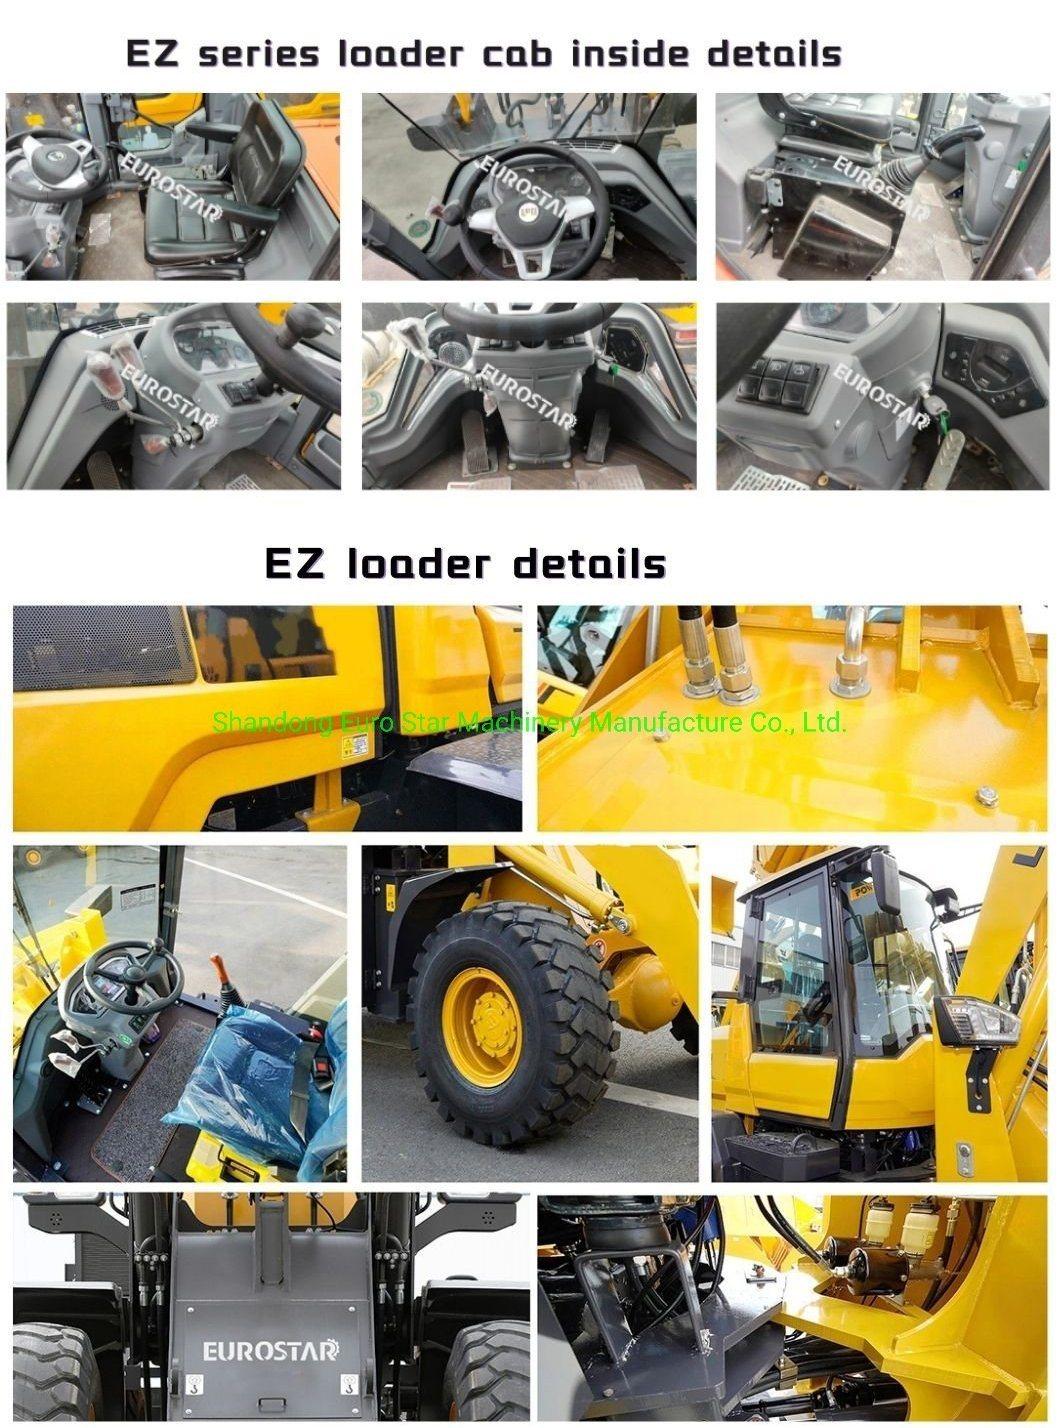 2.0t Mini Loader CE Small Articulated Front End Wheel Loader Construction Machinery for Railways, Highways, Mines, Hydropower Ect